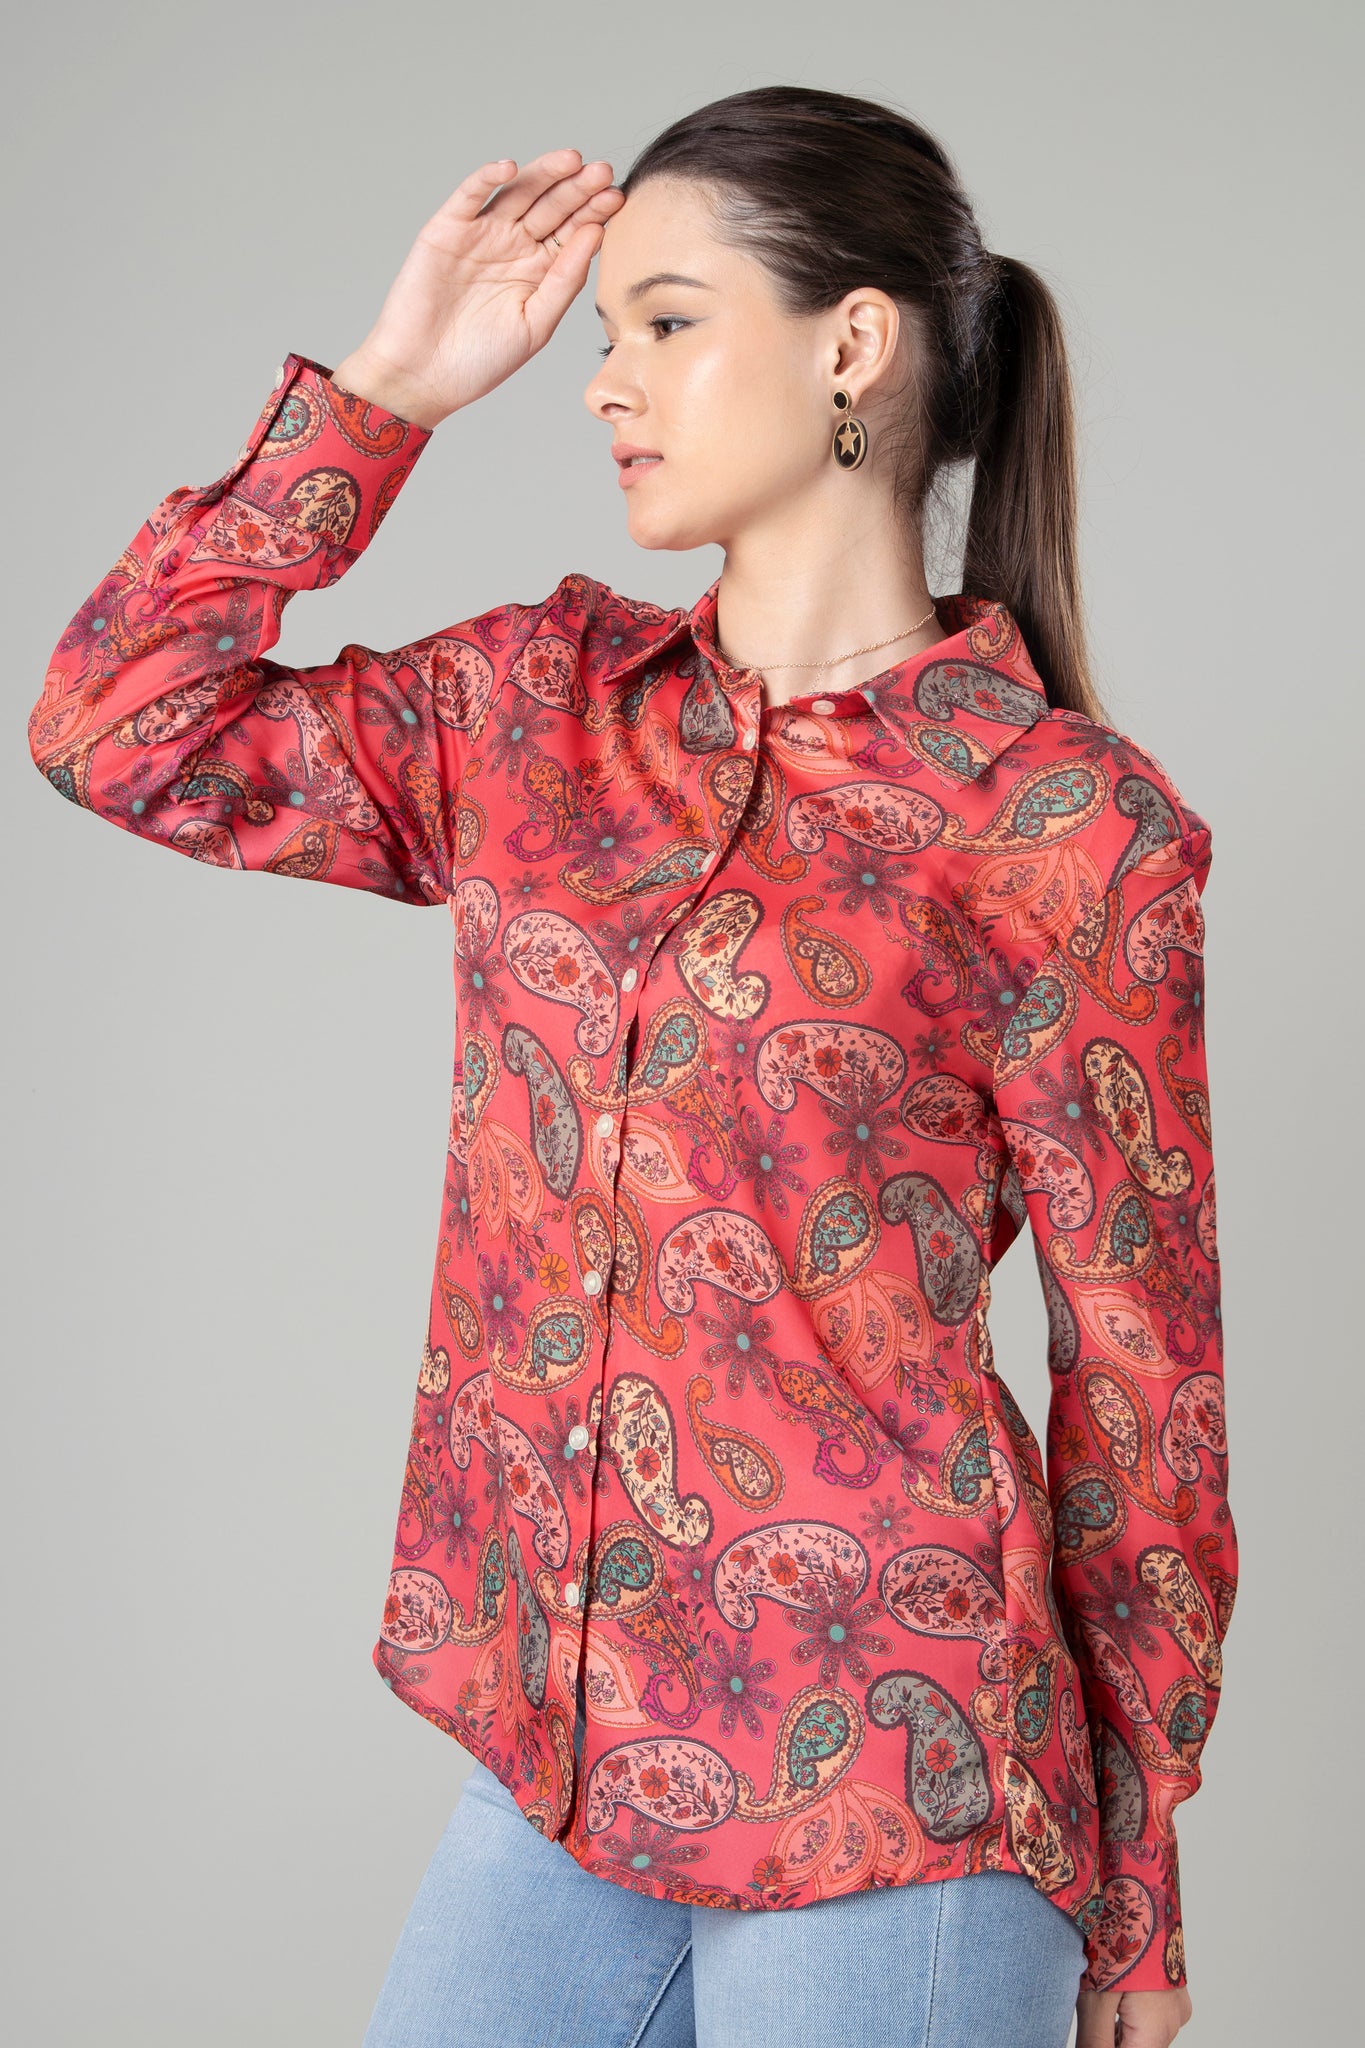 Abstract Paisley Shirt For Women